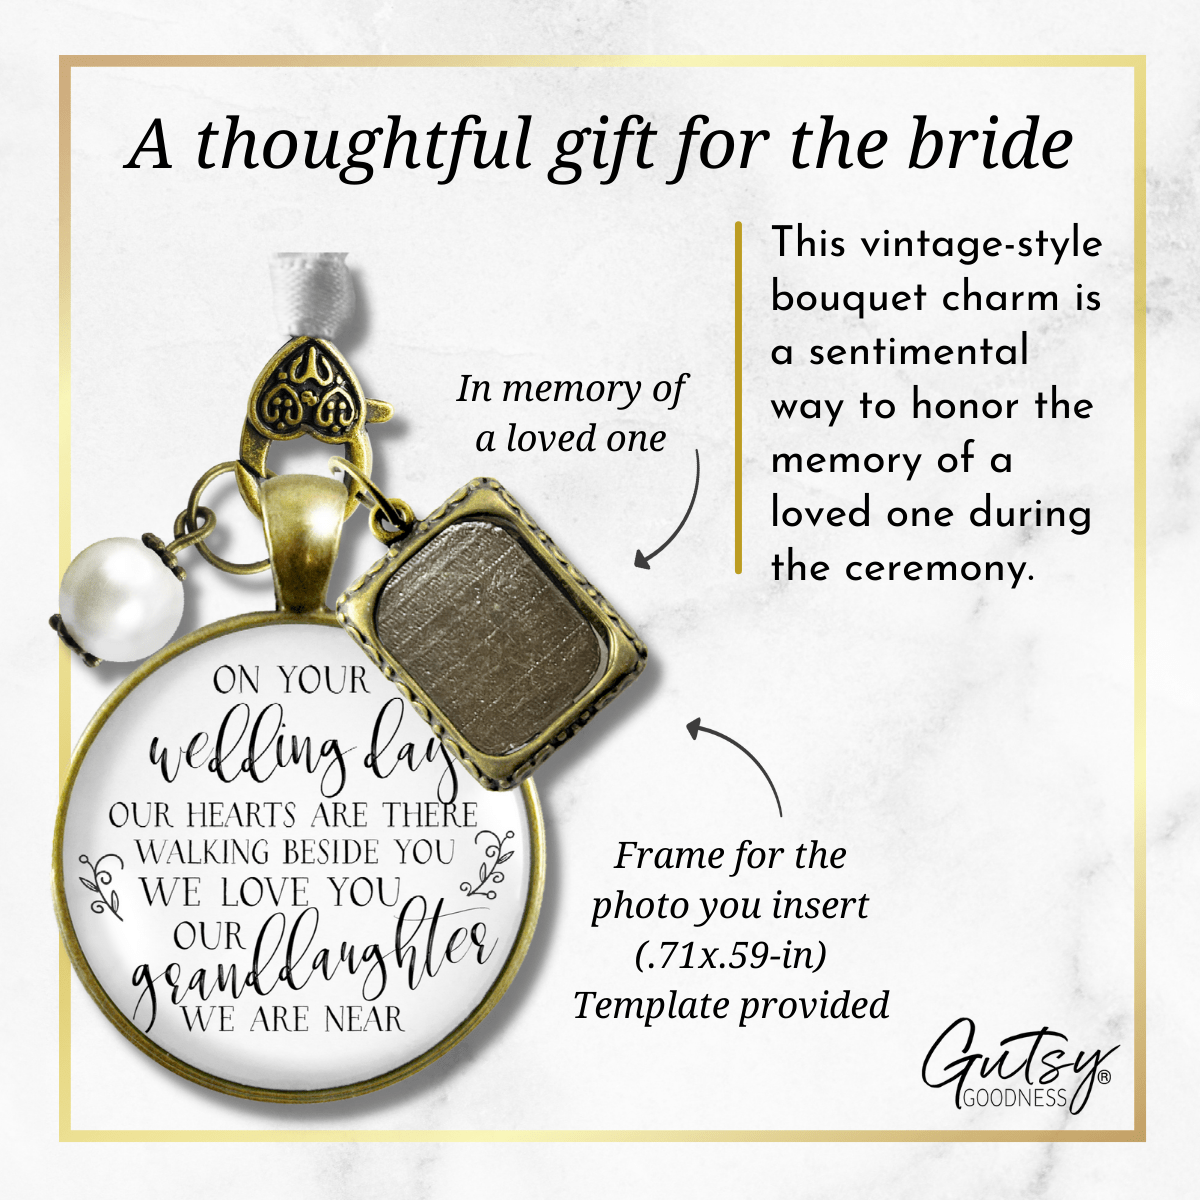 On Your Wedding Day OUR Heart Is There Walking Beside You GRANDDAUGHTER - BRONZE - WHITE - WHITE BEAD